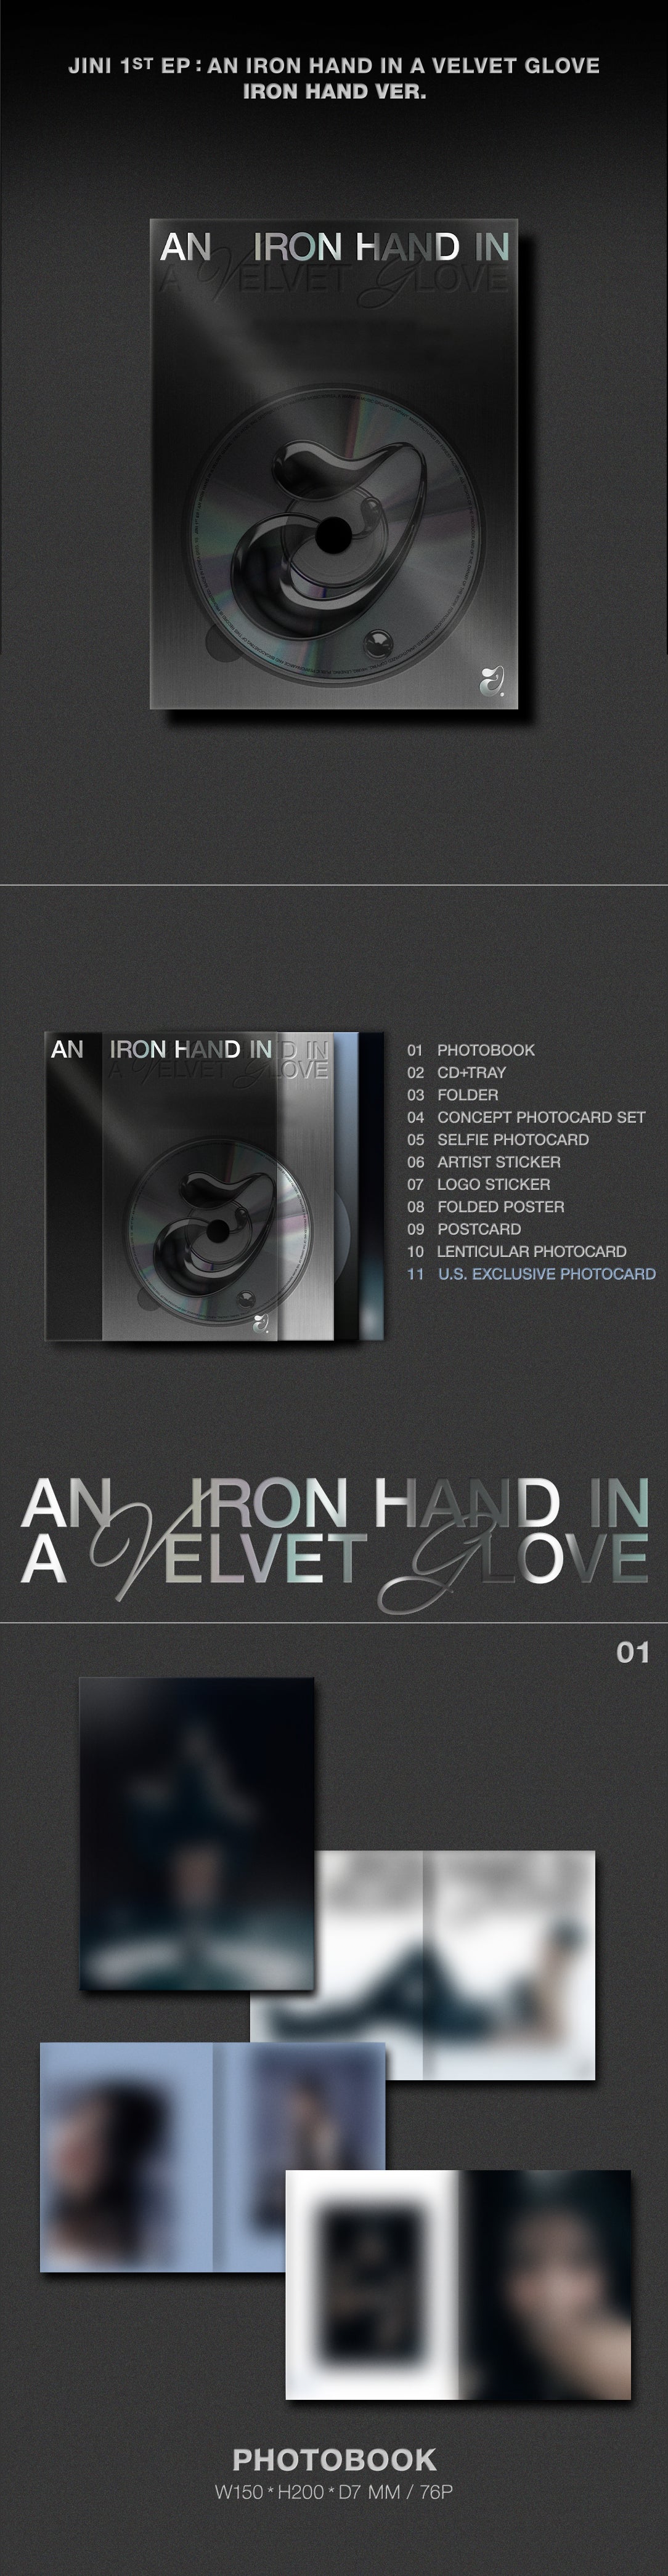 JINI - 1st EP 'AN IRON HAND IN A VELVET GLOVE' [SIGNED ALBUM] (US Exclusive)